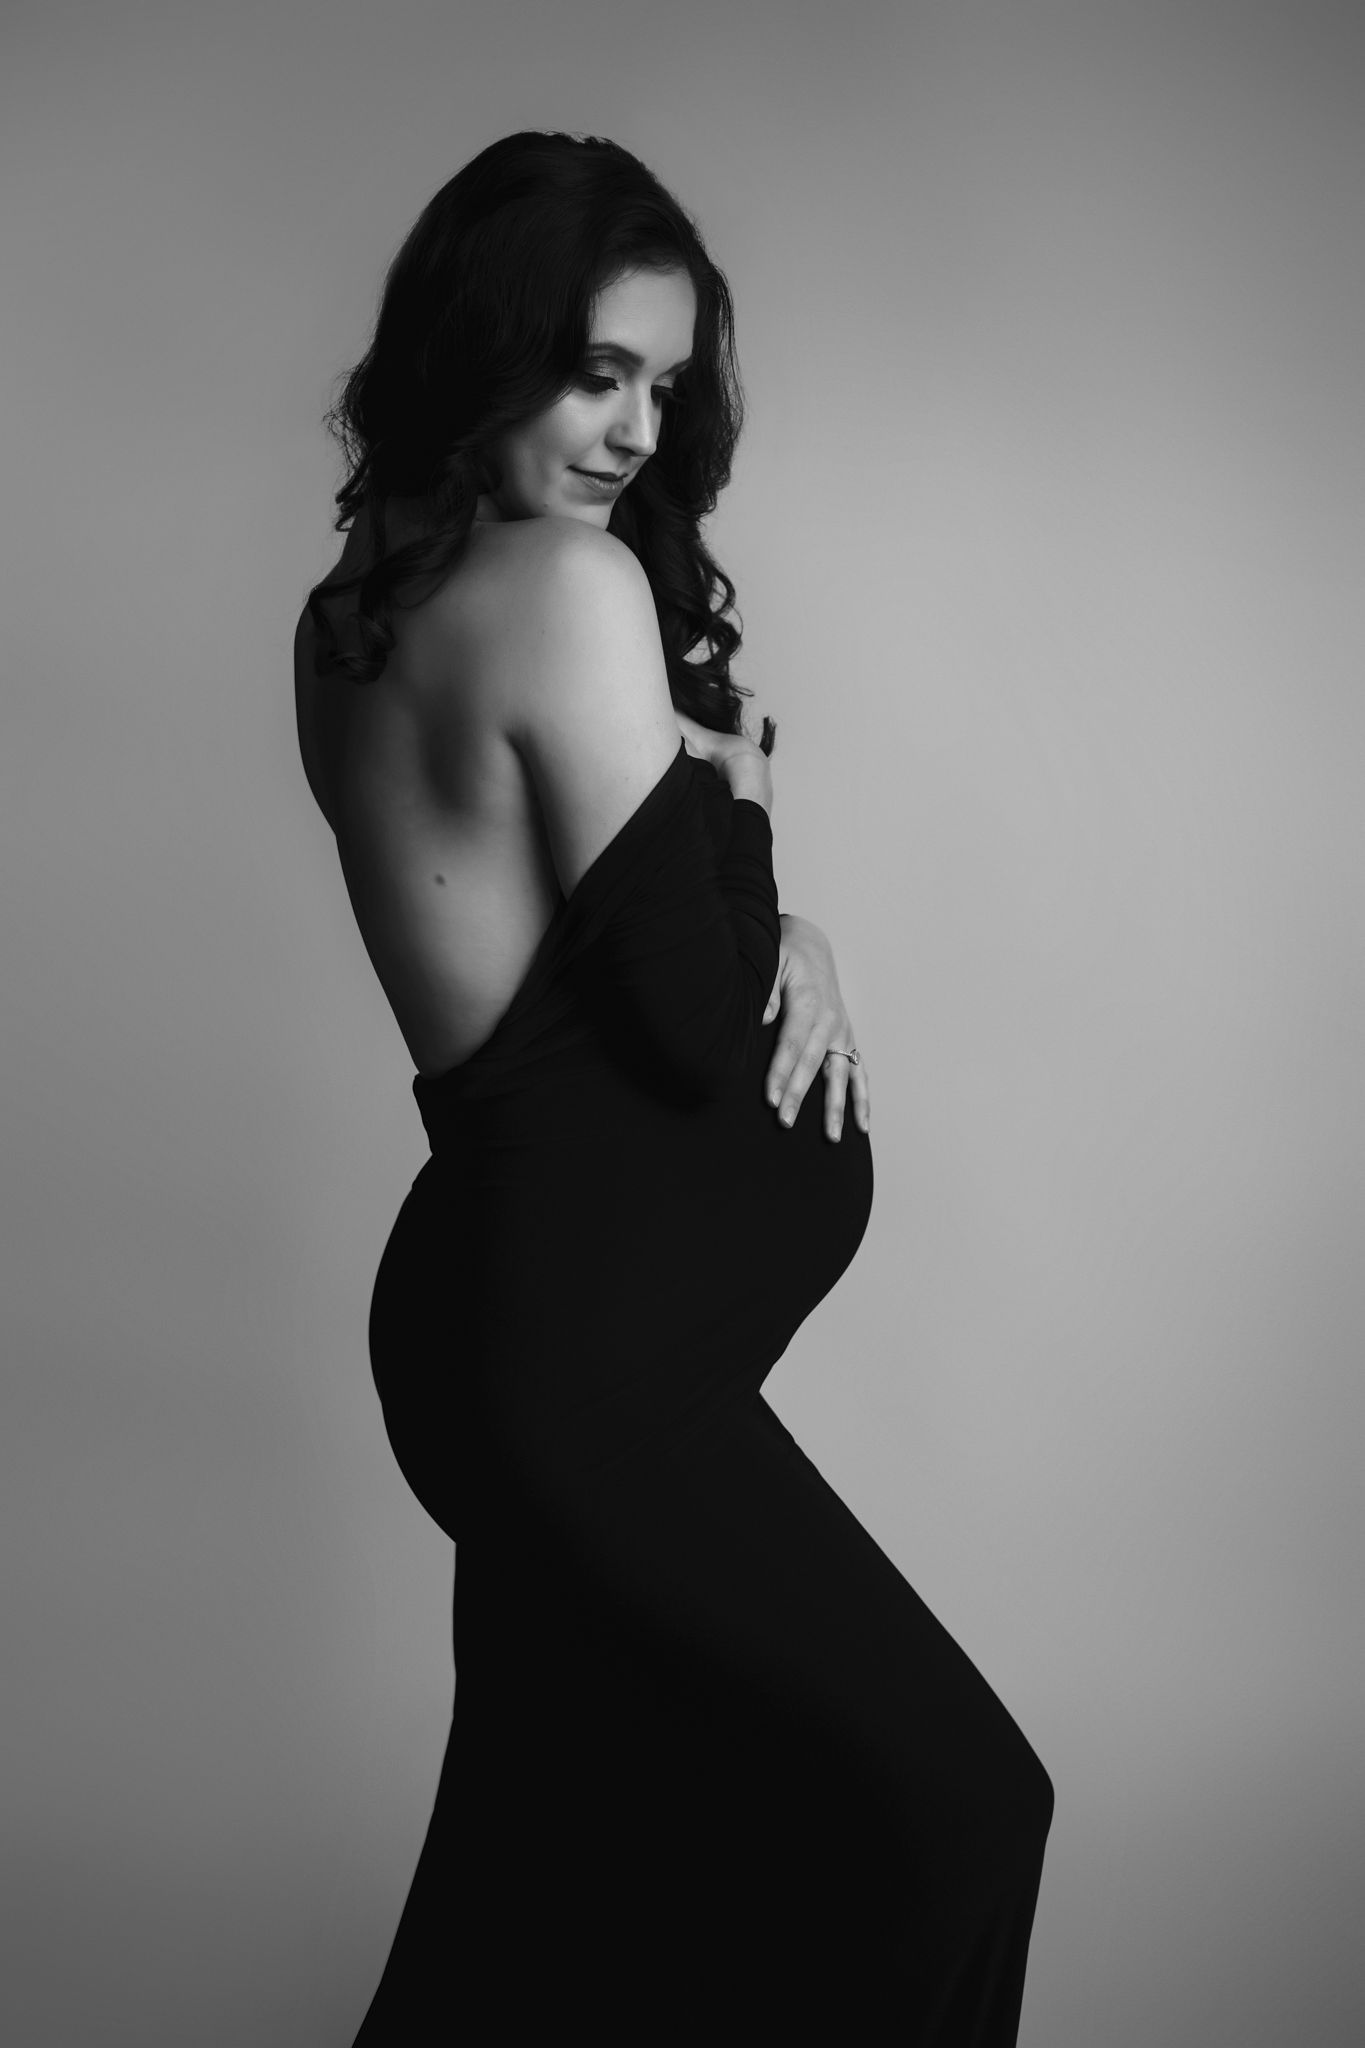 A mother to be stands in a studio in a black maternity gown with her shoulder exposed